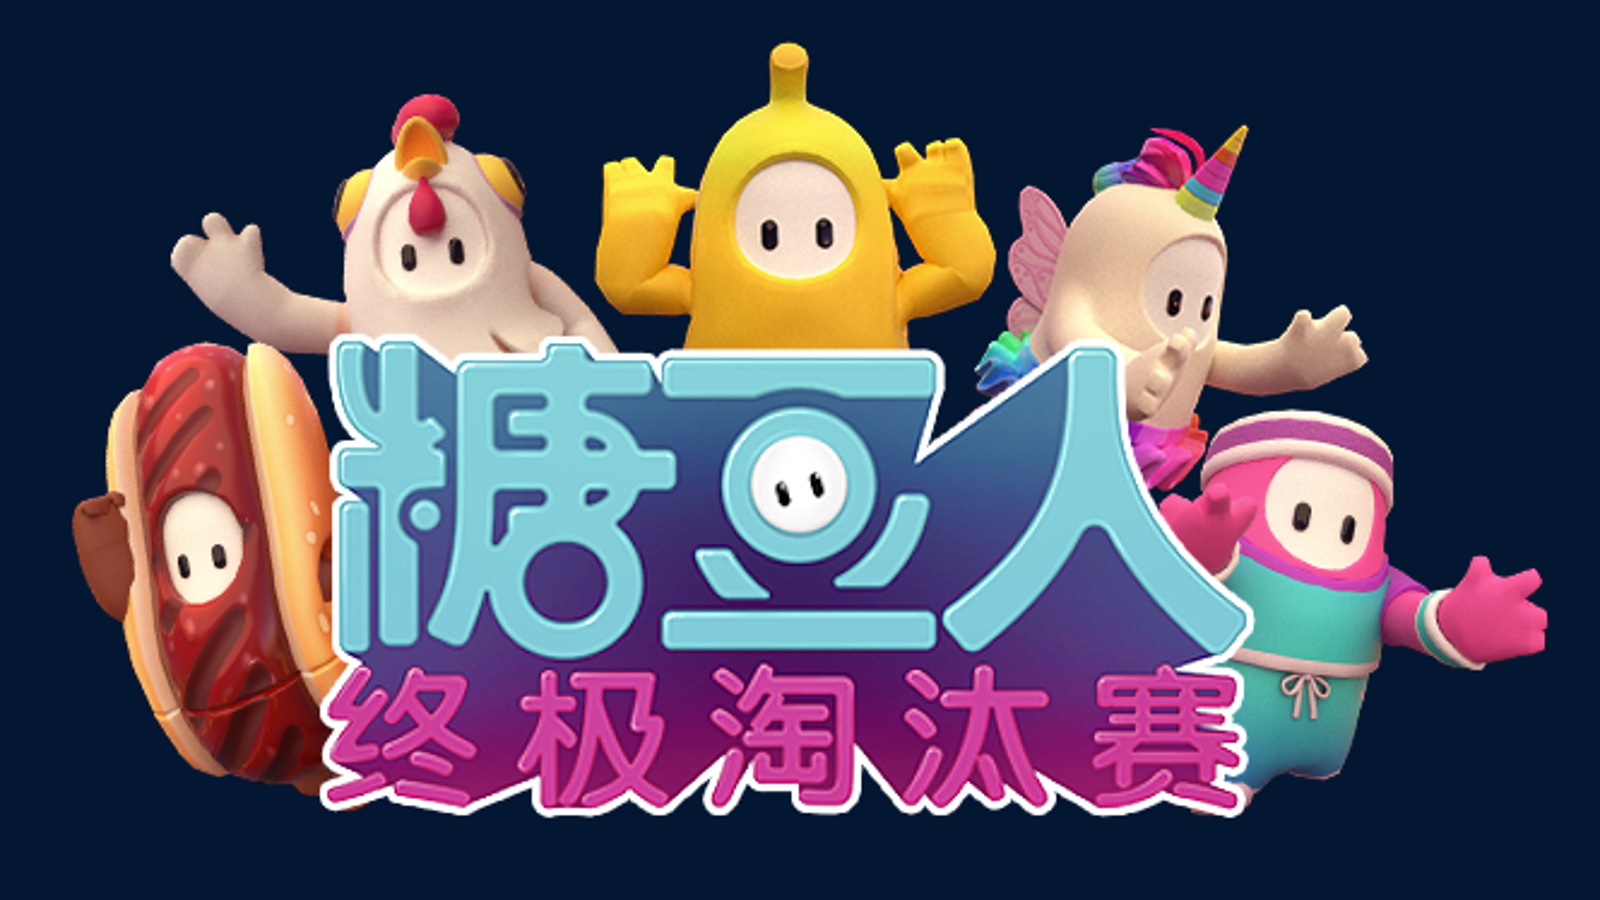 Fall Guys' Mobile Version Releasing in China